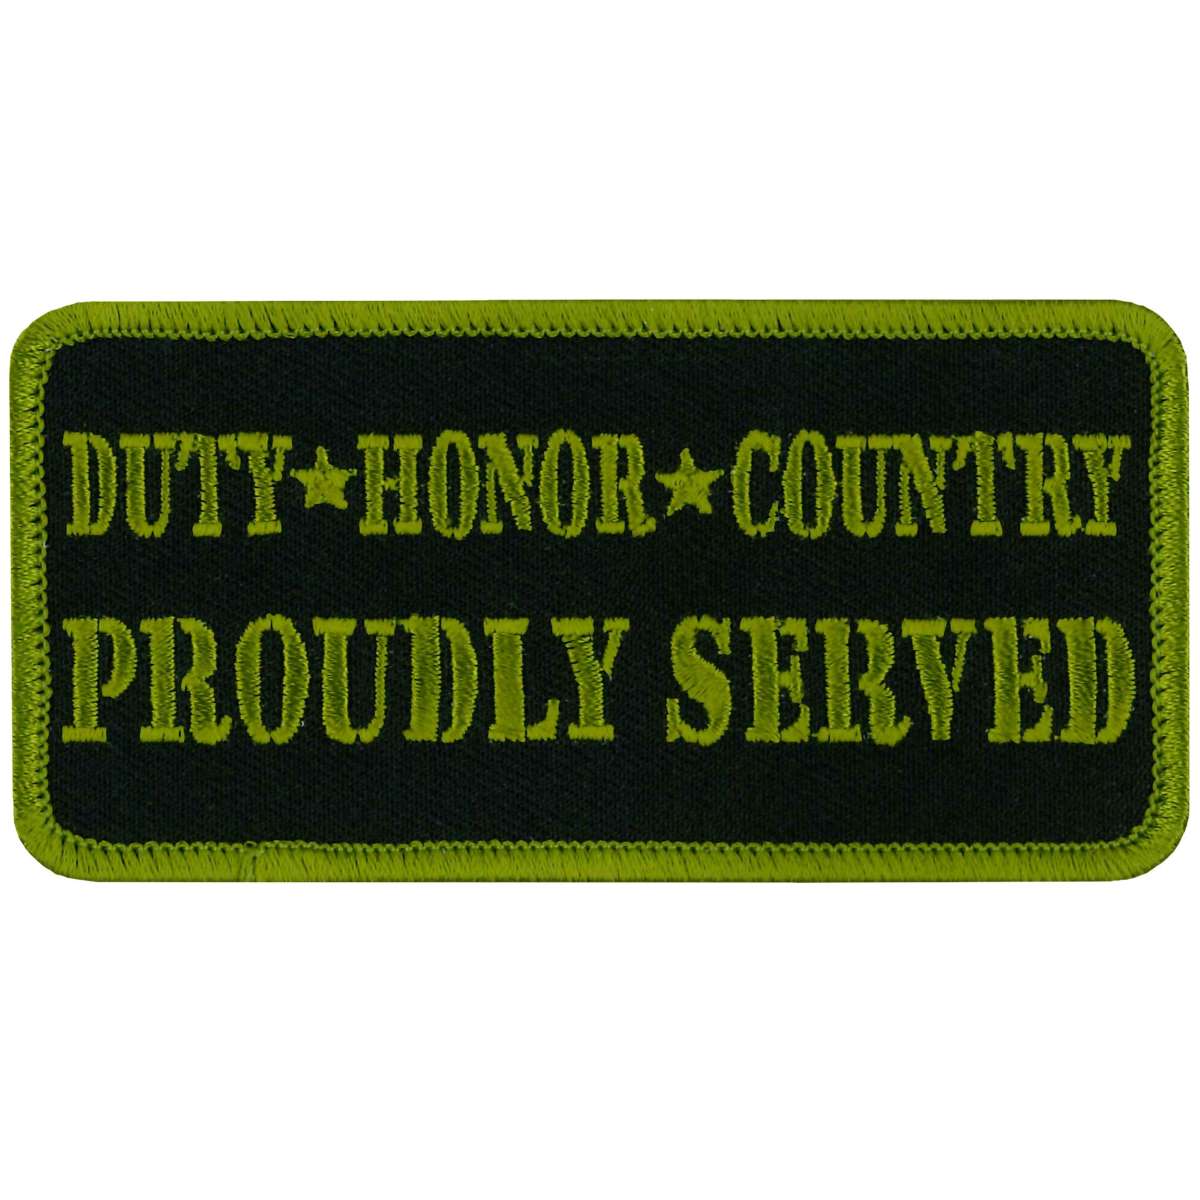 Hot Leathers PPL9420 Duty Honor Country Patch